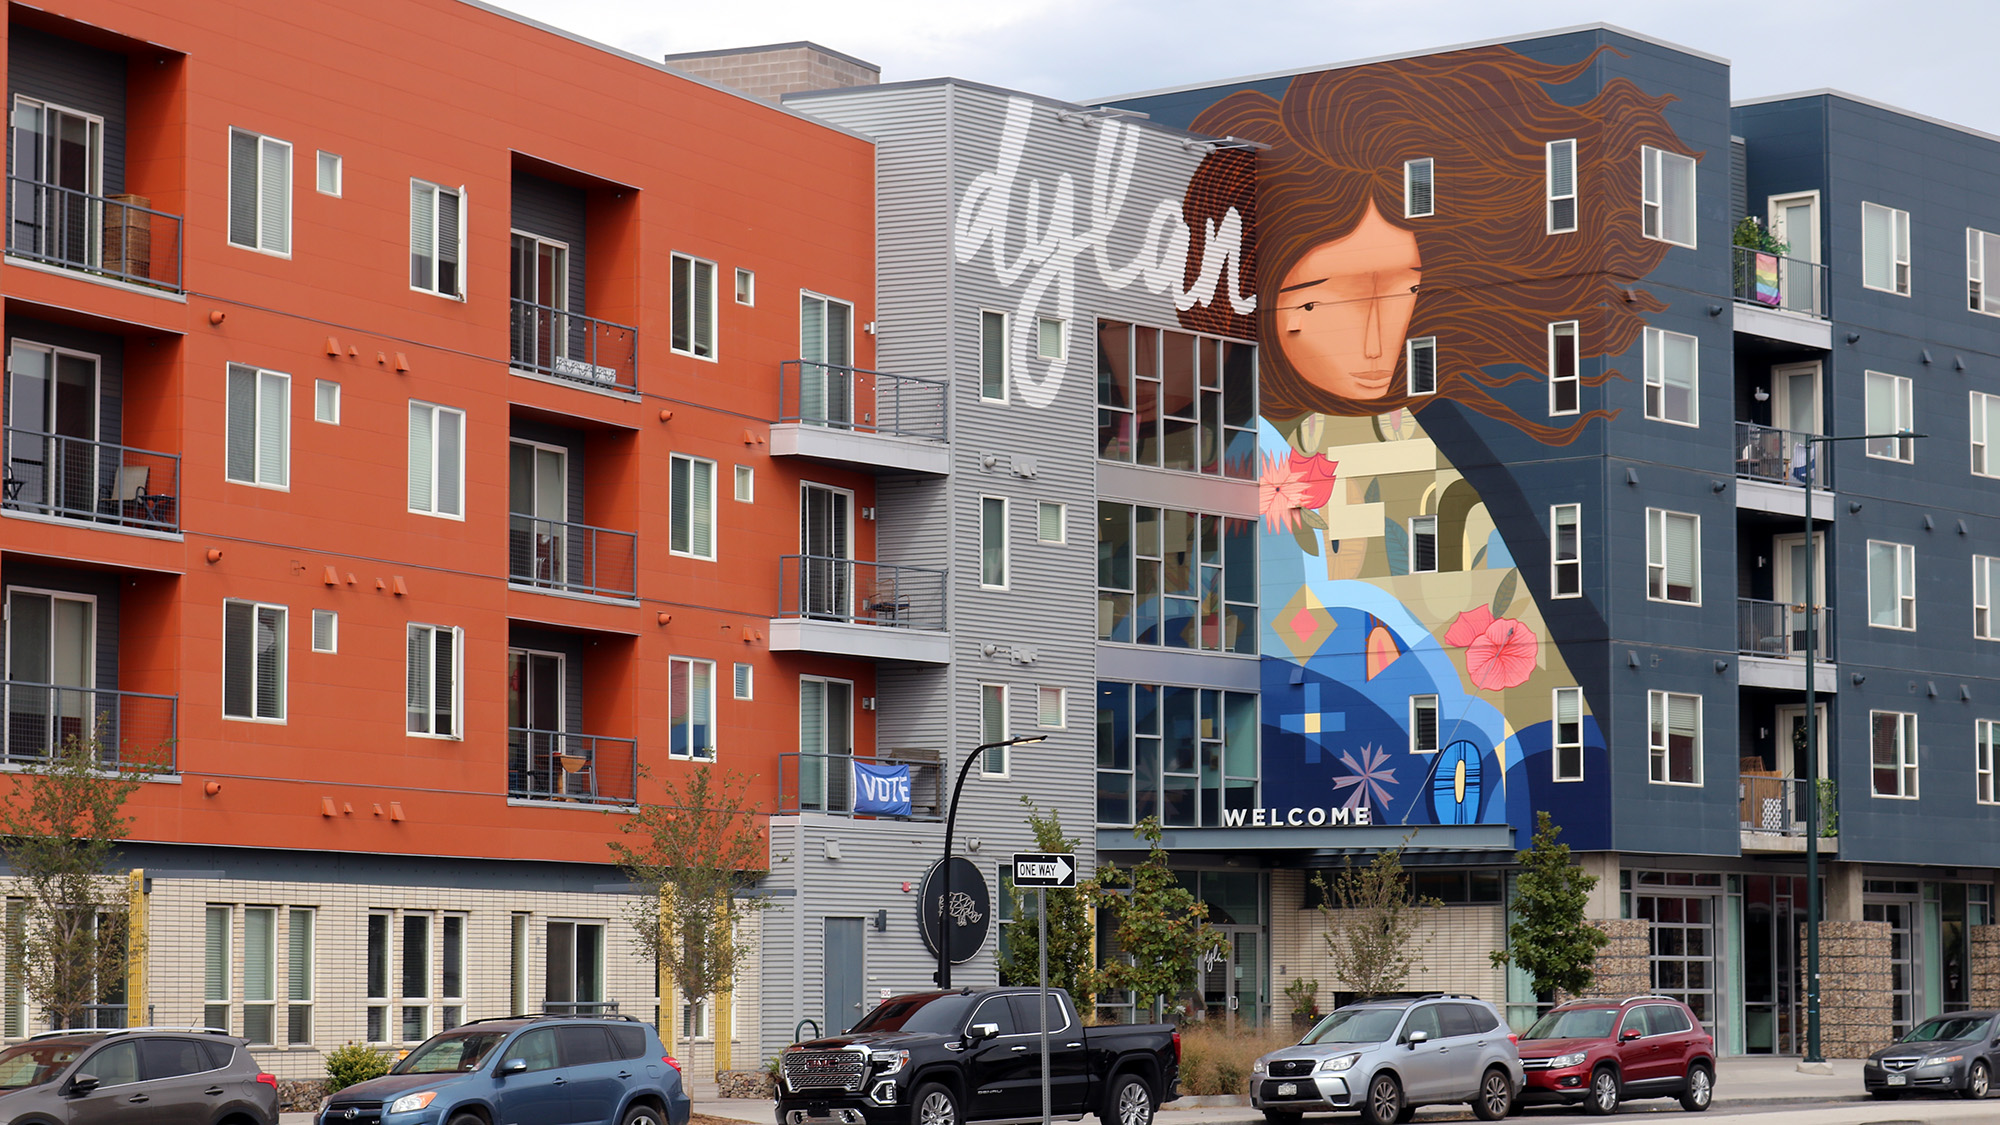 Exterior front entrance of Dylan apartmetns with art mural